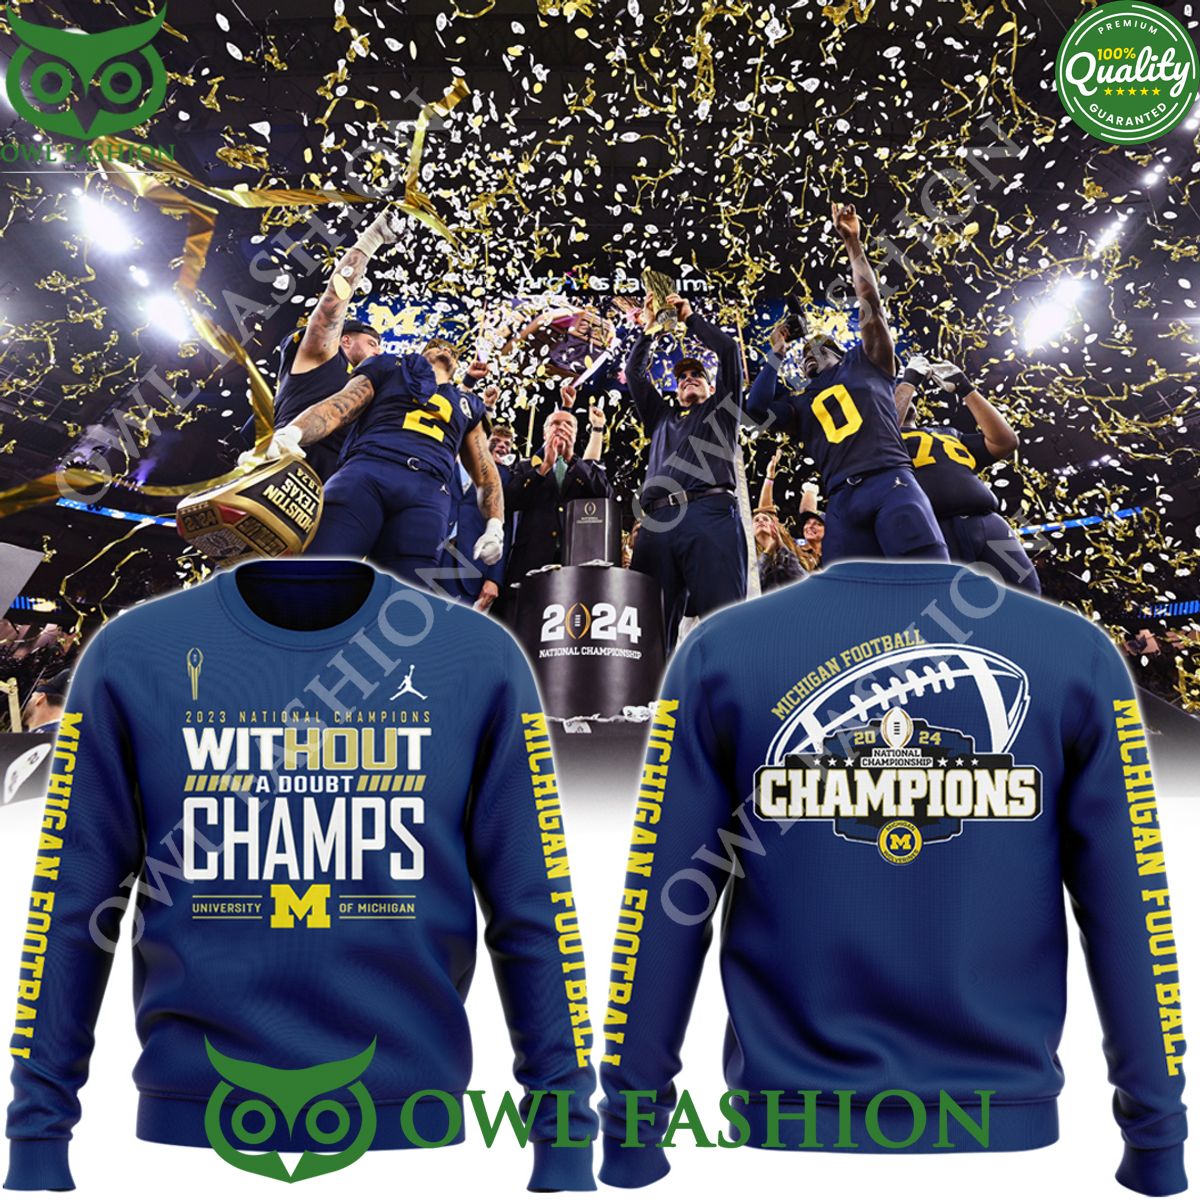 Michigan Wolverines football NATIONAL CHAMPIONSHIP 2024 without a doubt